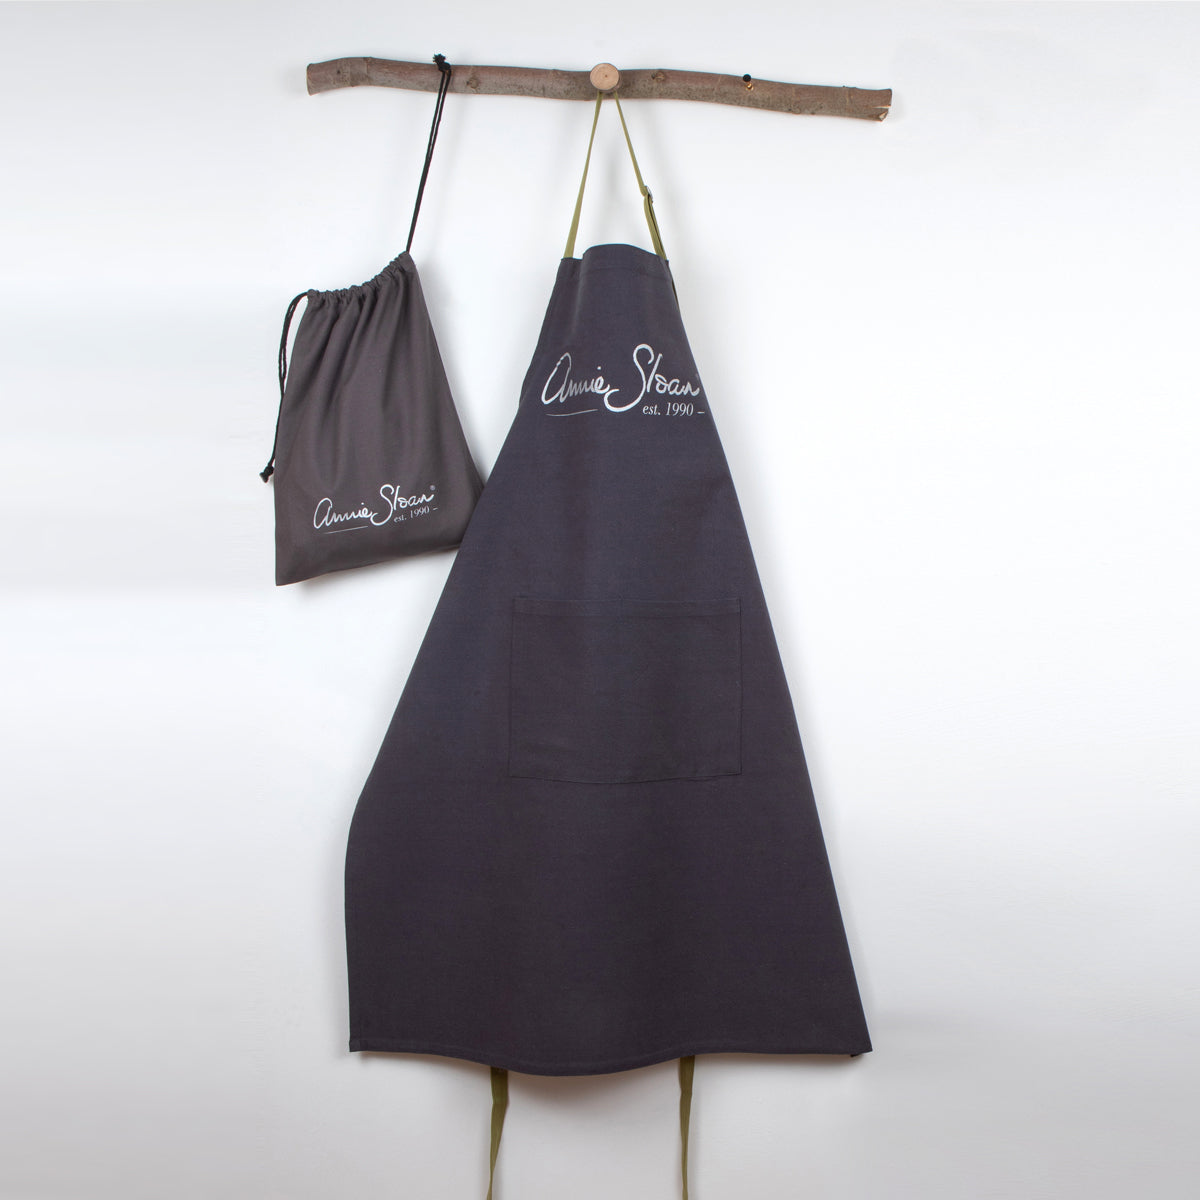 Annie Sloan Cotton Linen Apron with Tool Bag